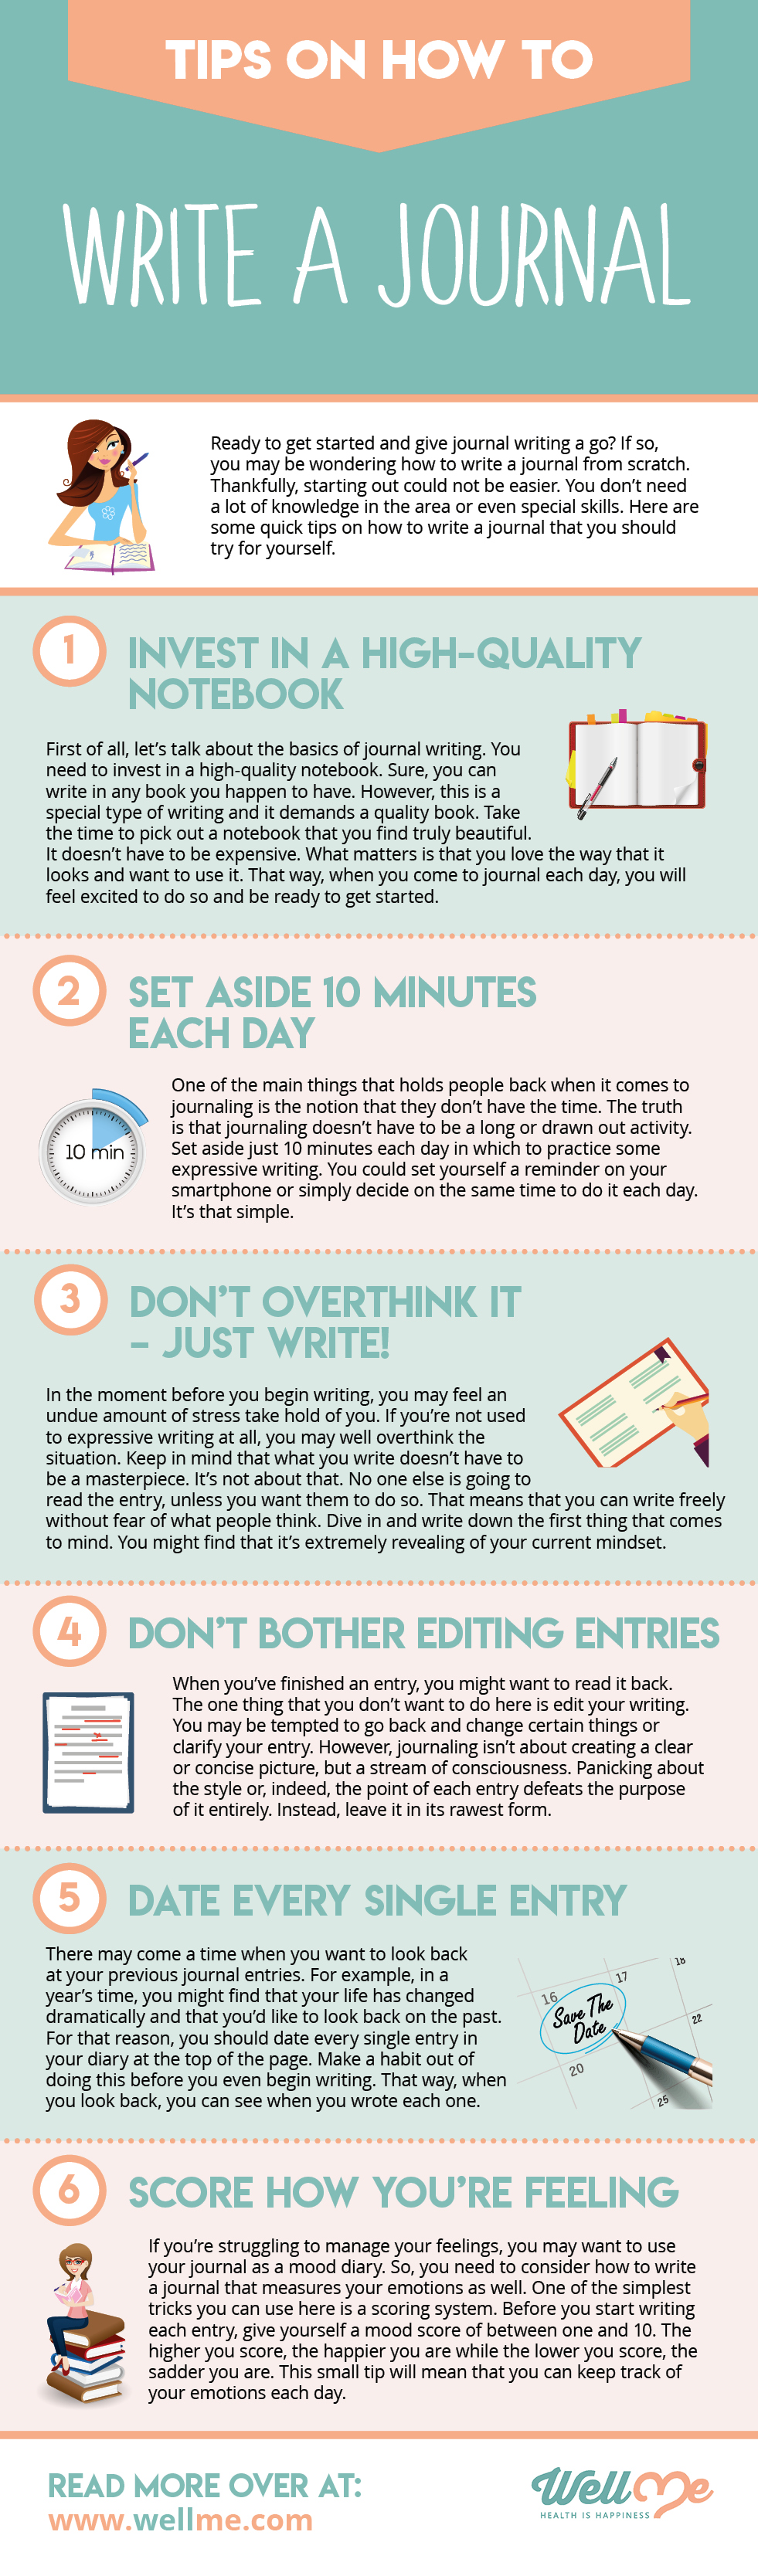 Tips on How to Write a Journal infographic